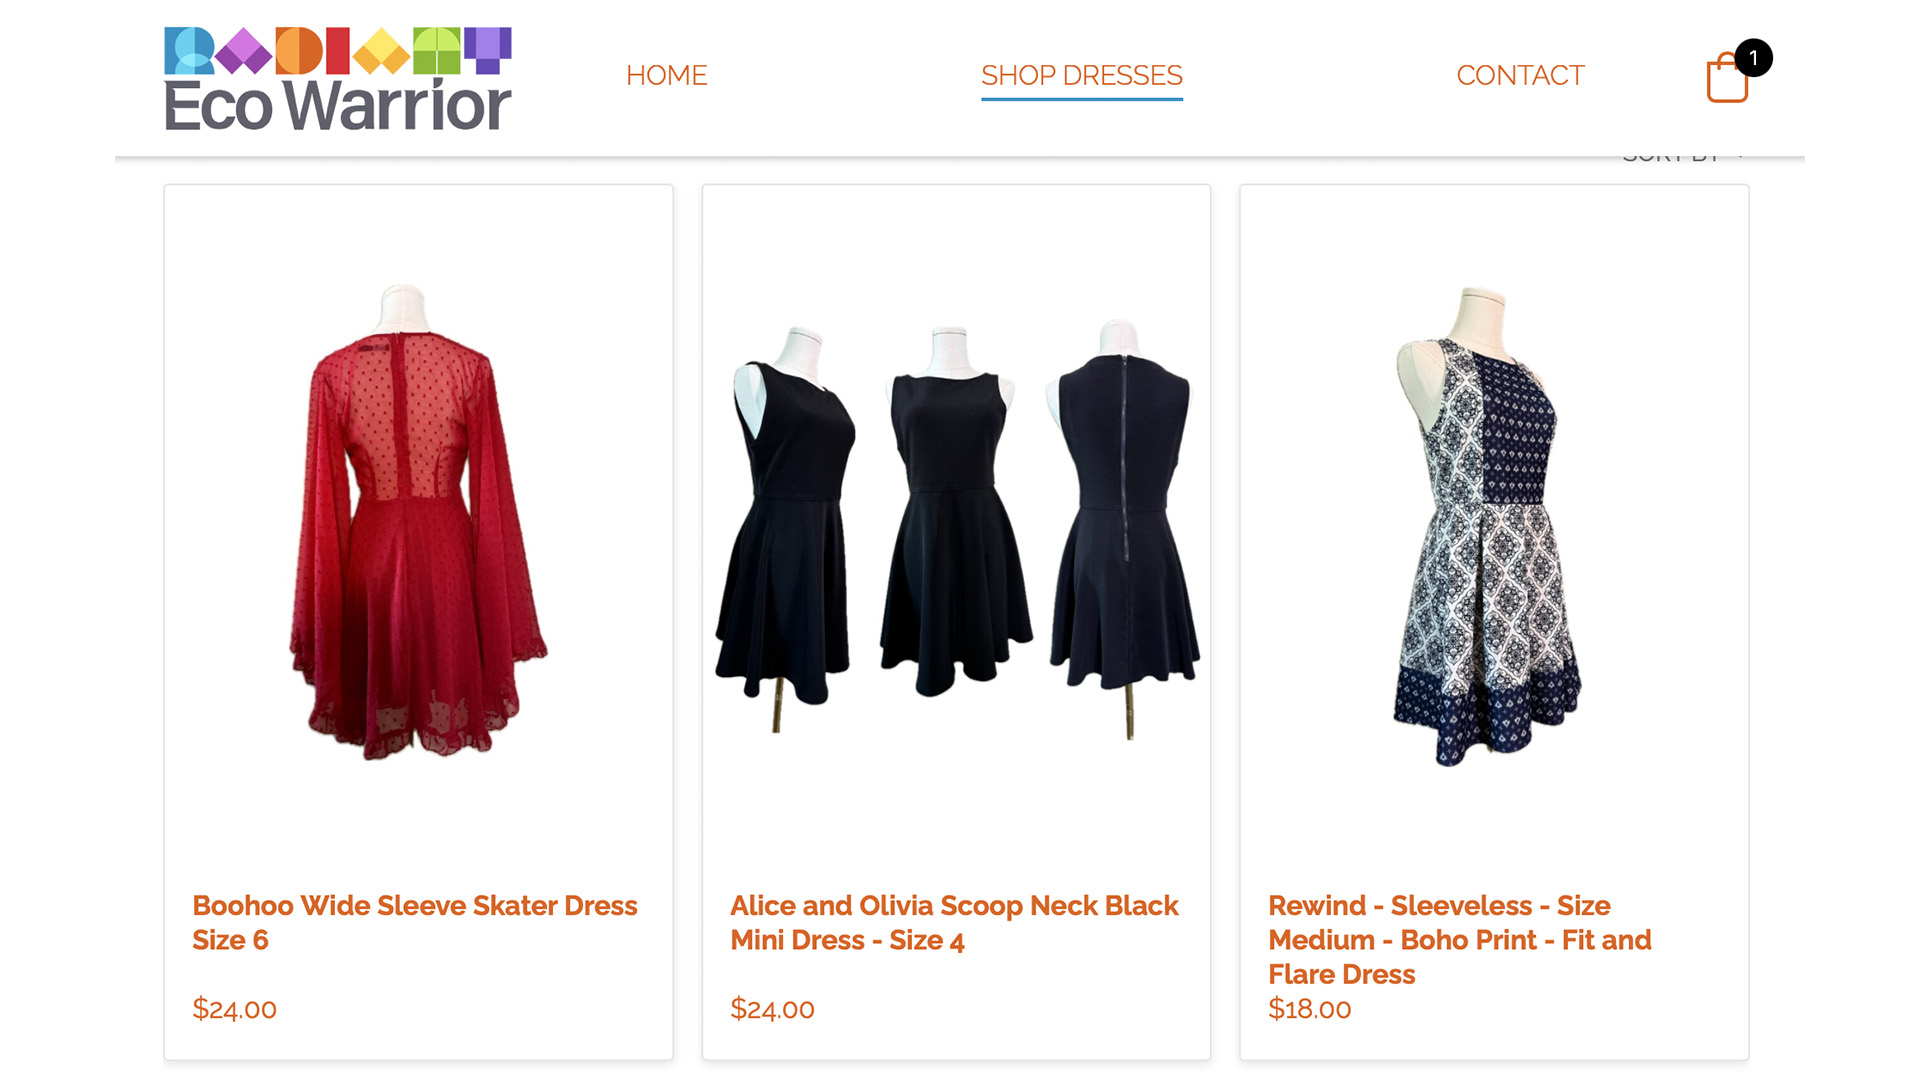 Website Design by Conscious Web Presence, showcasing a modern clothing e-commerce site.